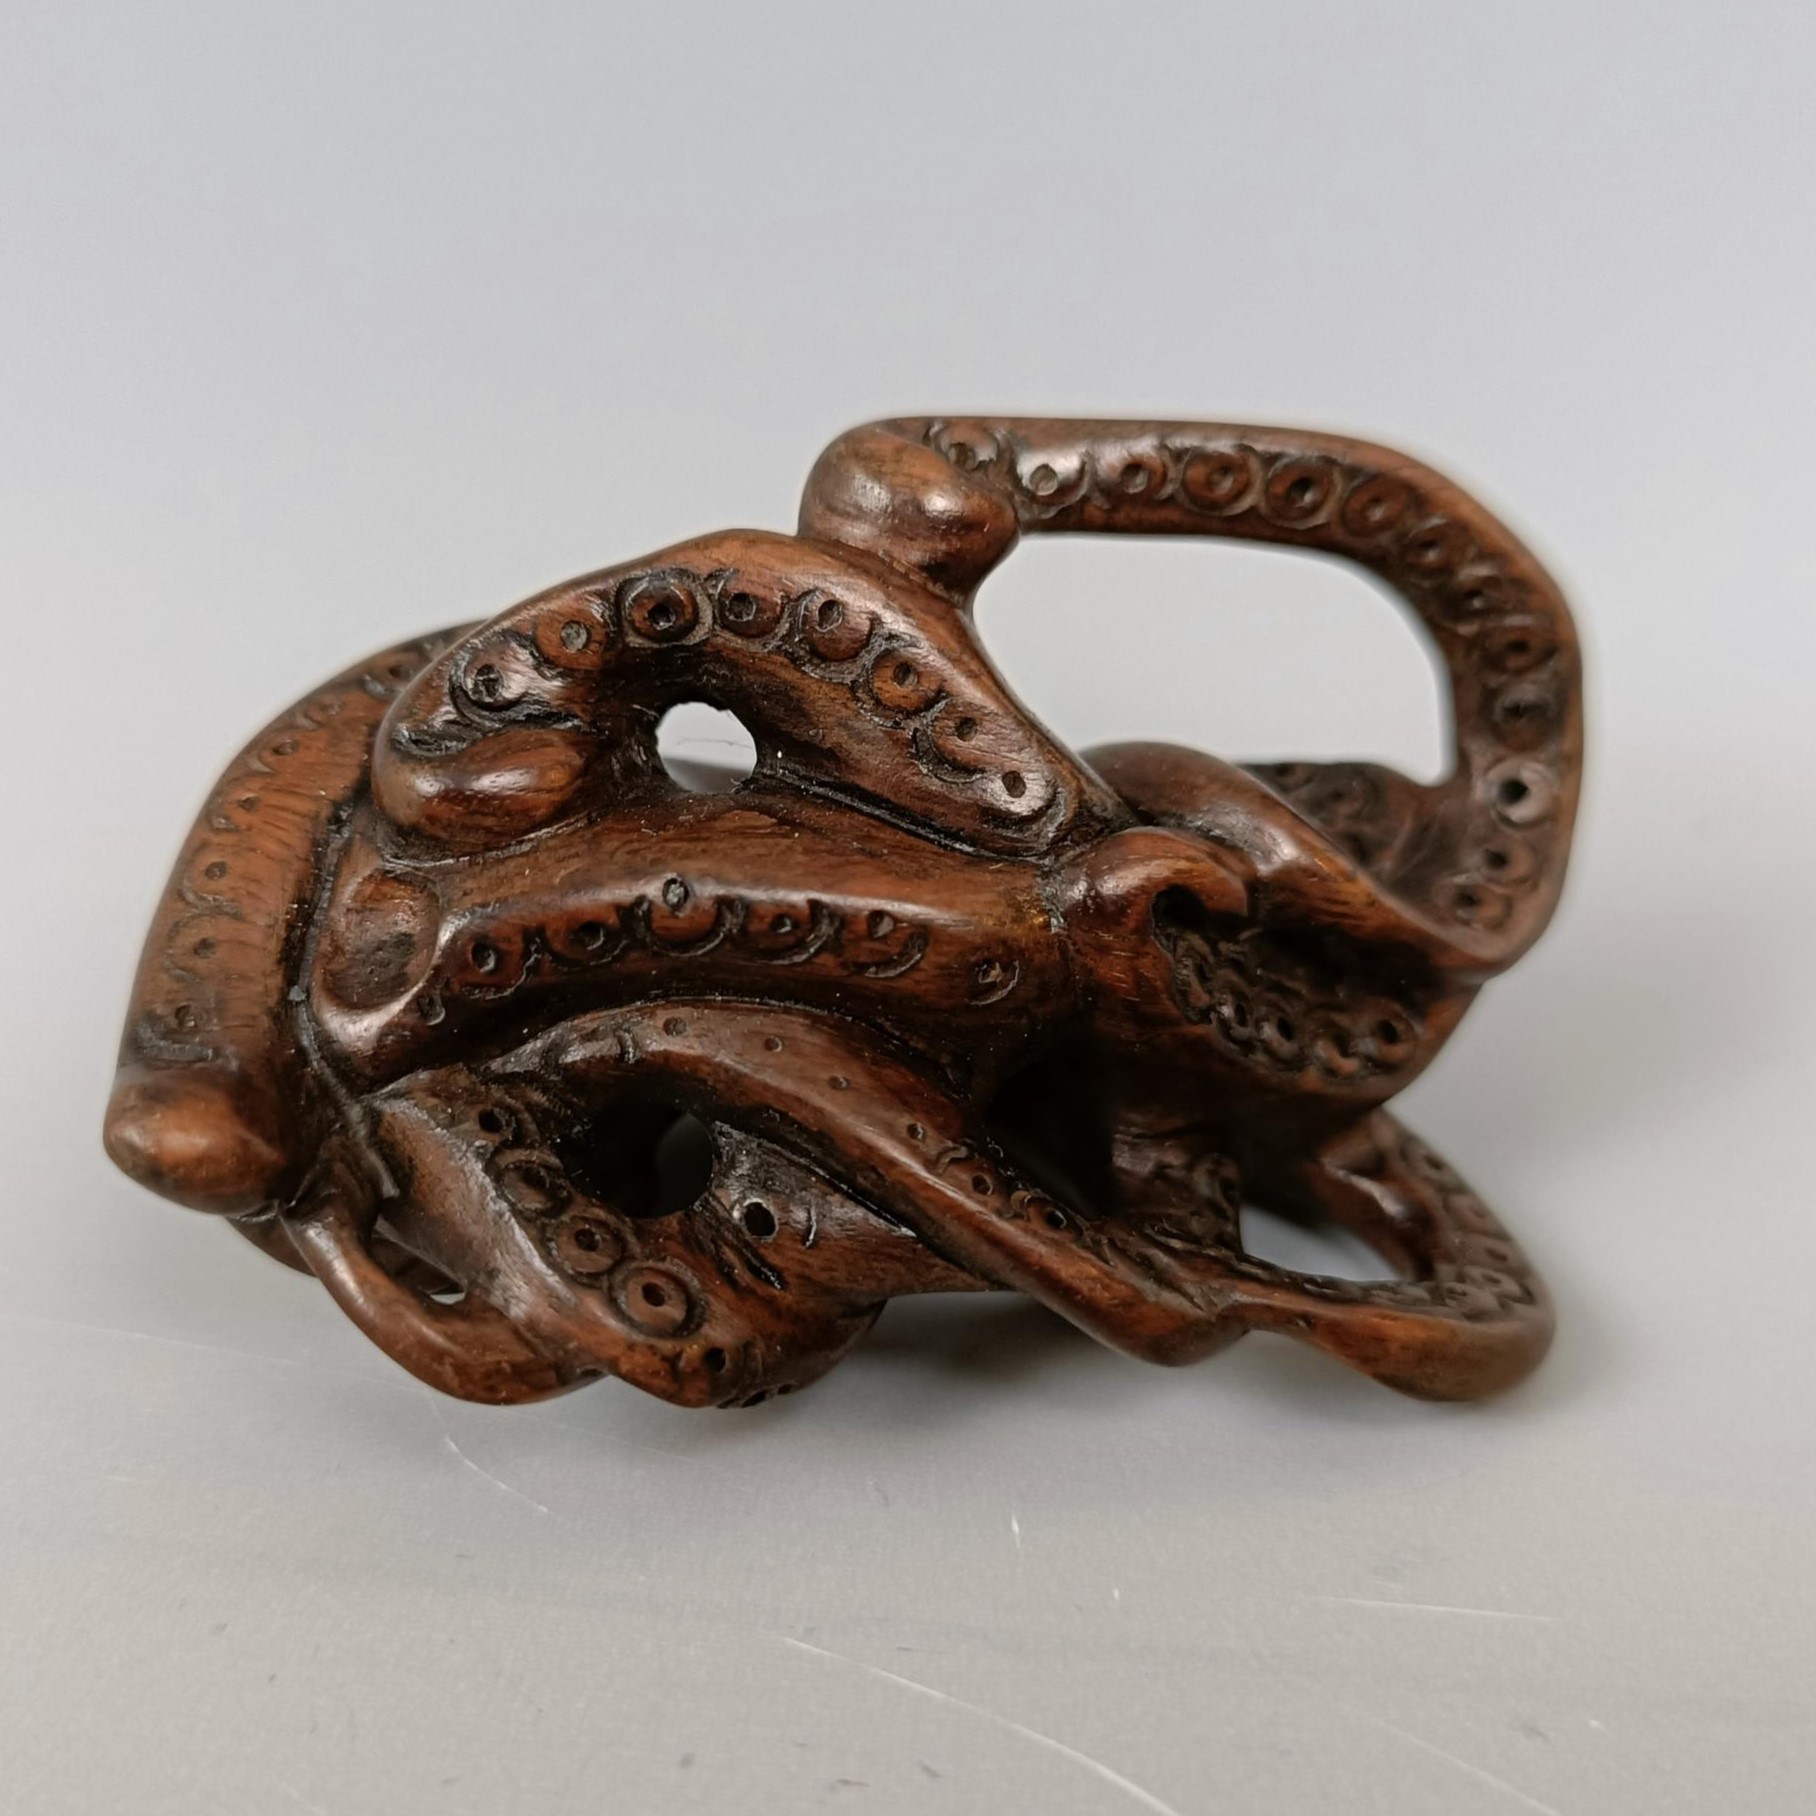 A carved wooden netsuke, in the form of an octopus, 5 cm wide - Image 3 of 5